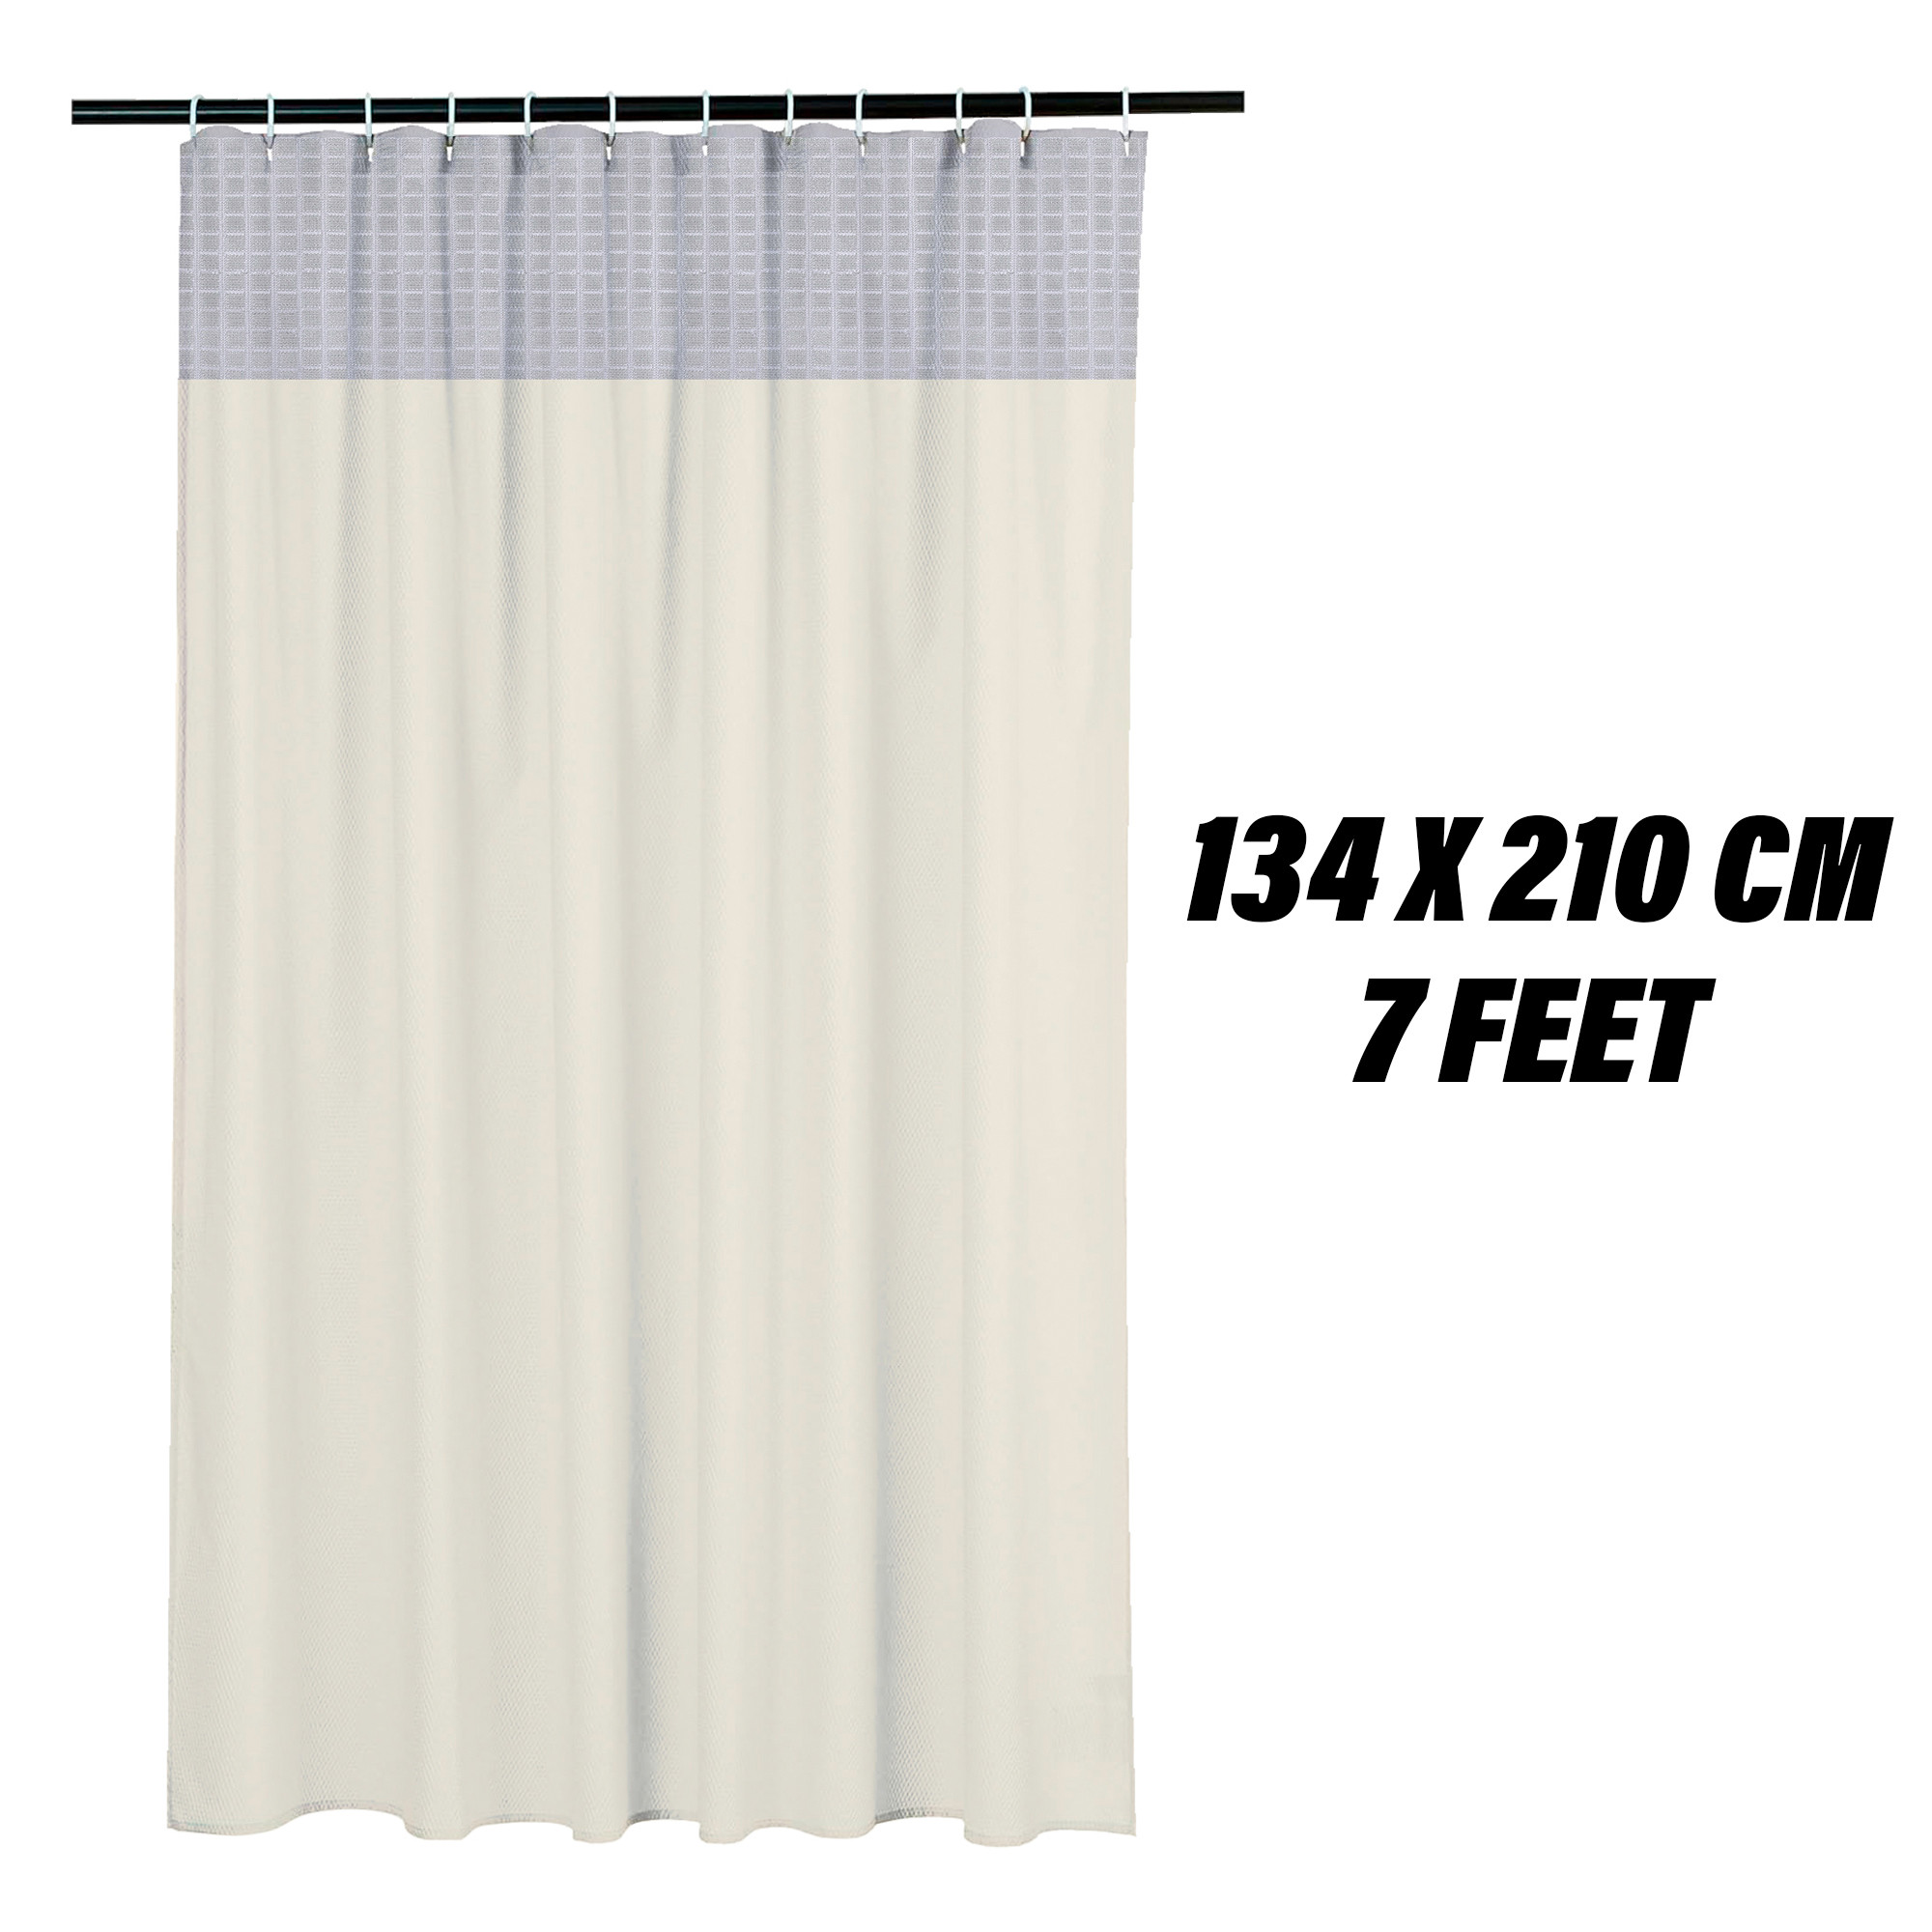 Kuber Industries AC Curtain | PVC Hospital Bed Curtain | Curtains for Hospital | Curtain for Bathroom | Window Blackout Curtain | Shower Curtain with 8 Rings | 7 Feet | Cream